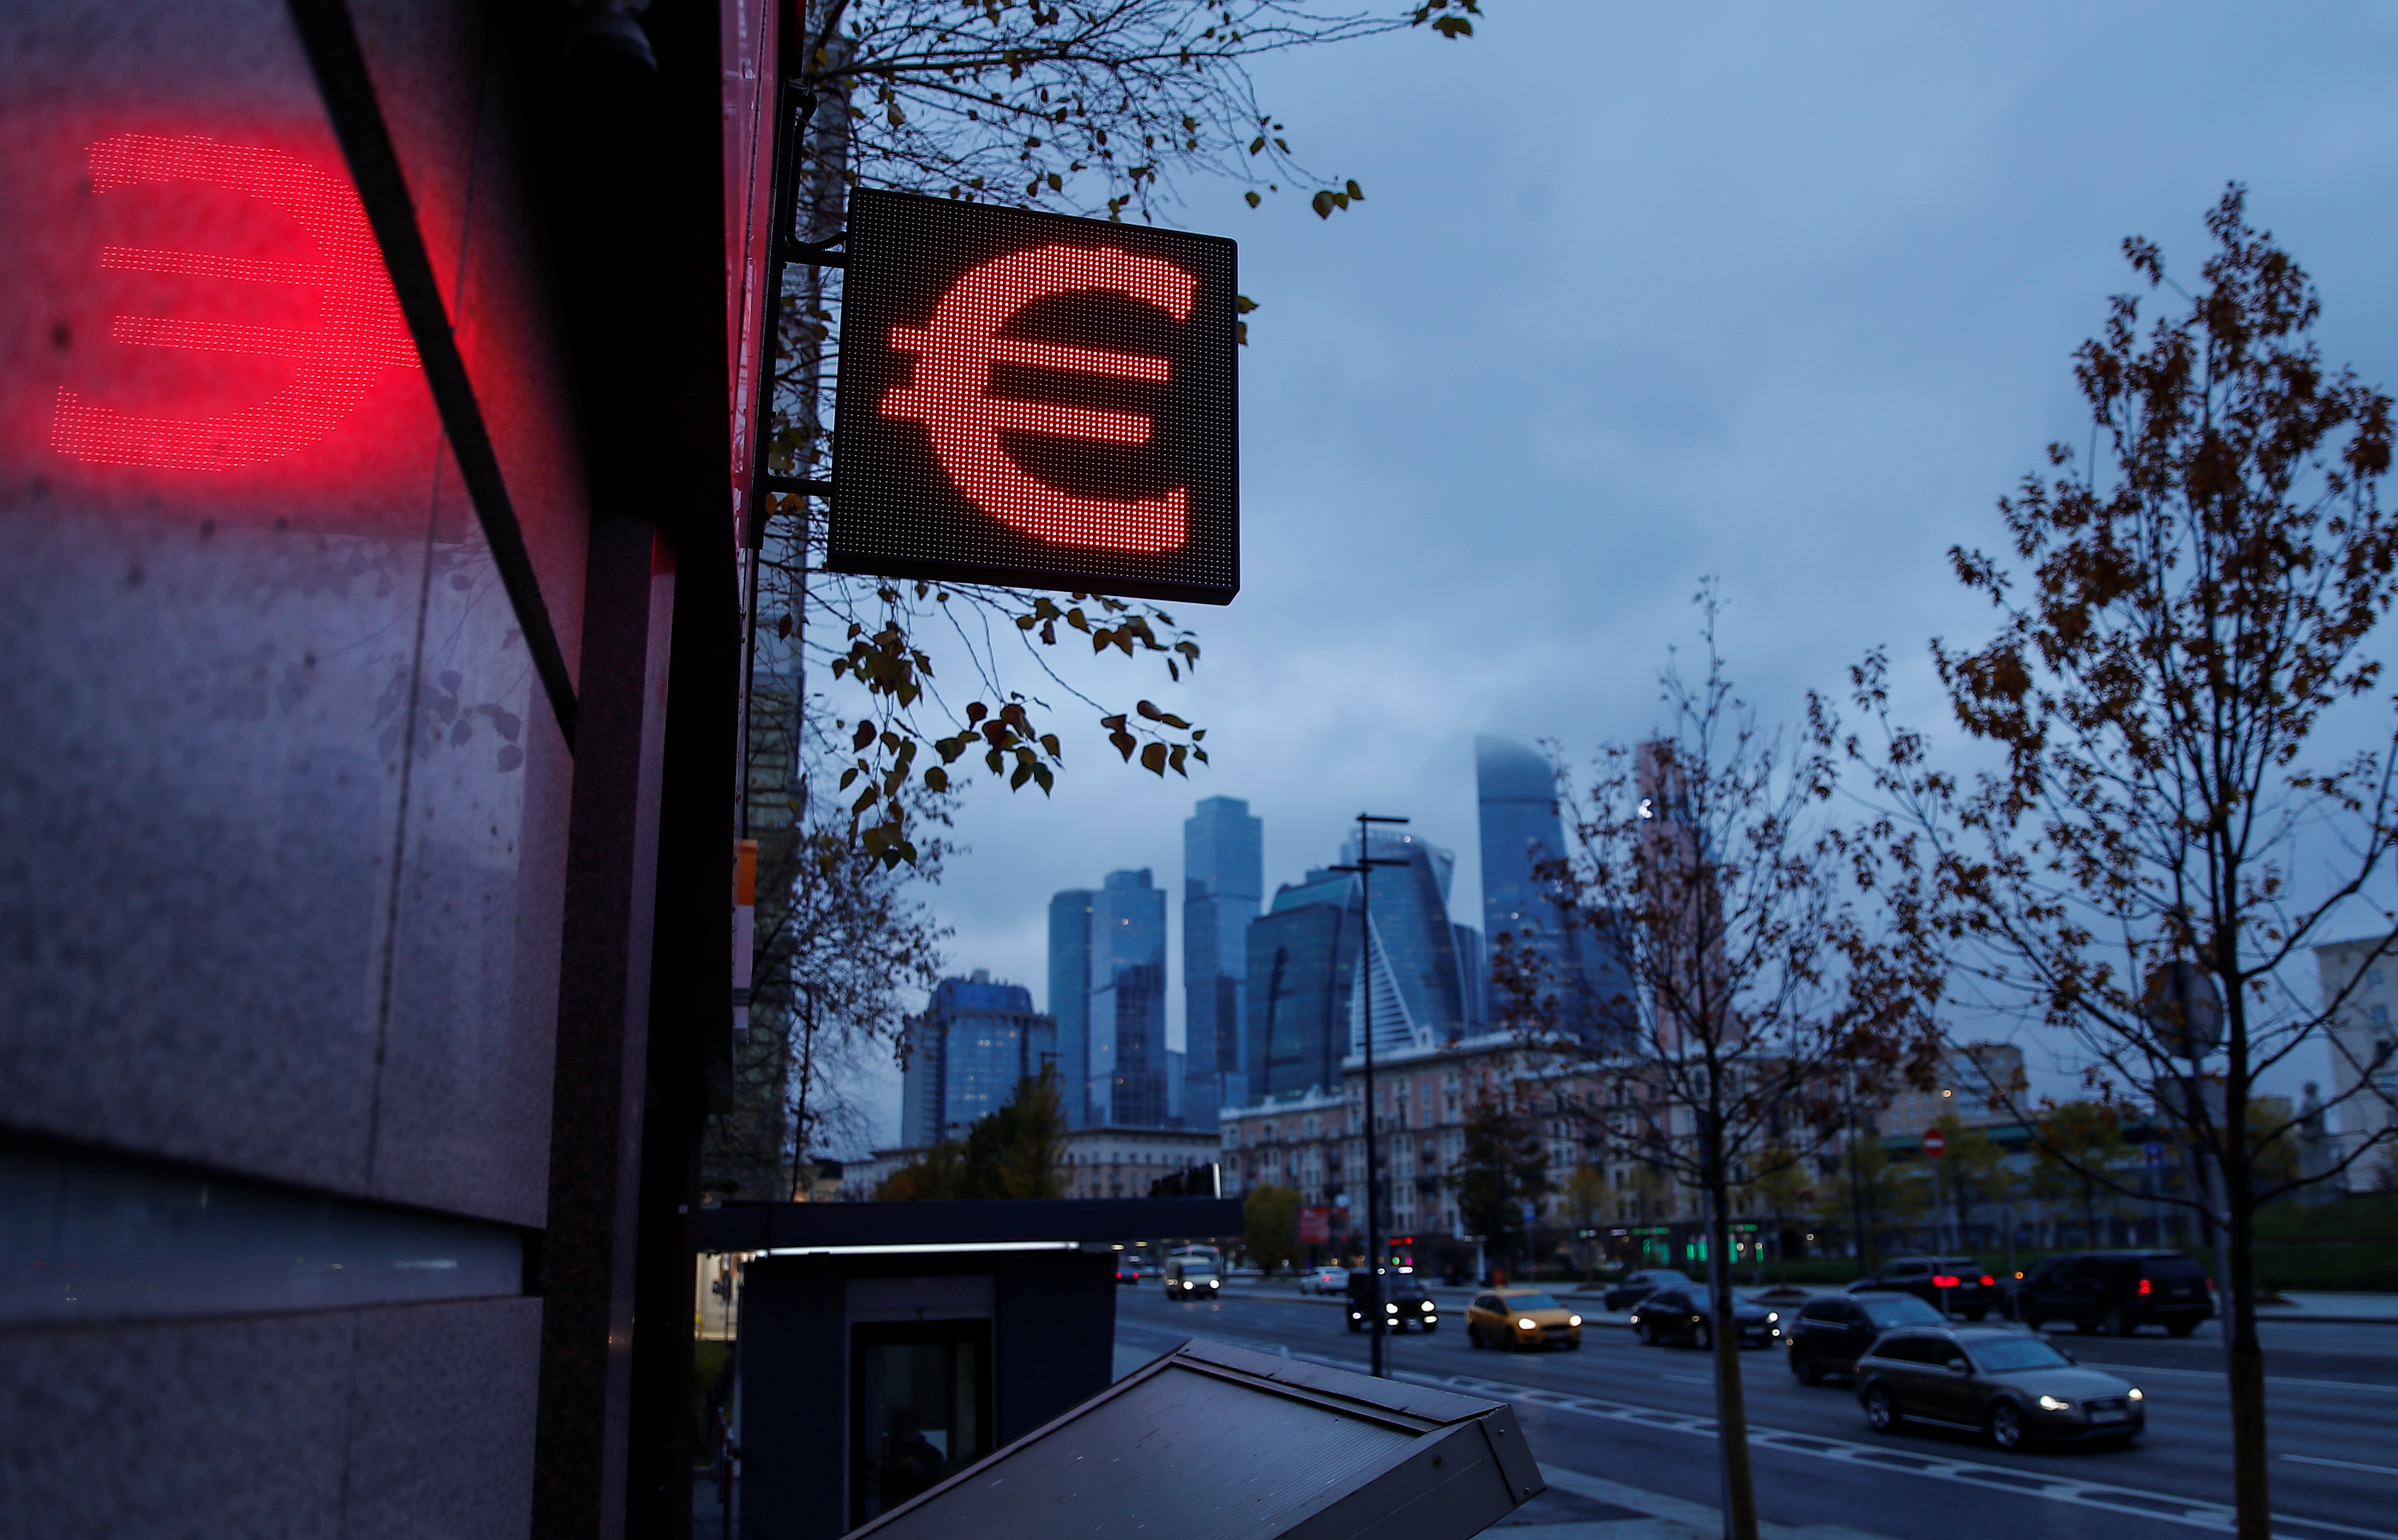 Advertisement board showing sign of the euro  is seen next to skyscrapers of Moskva-City businesss district in Moscow